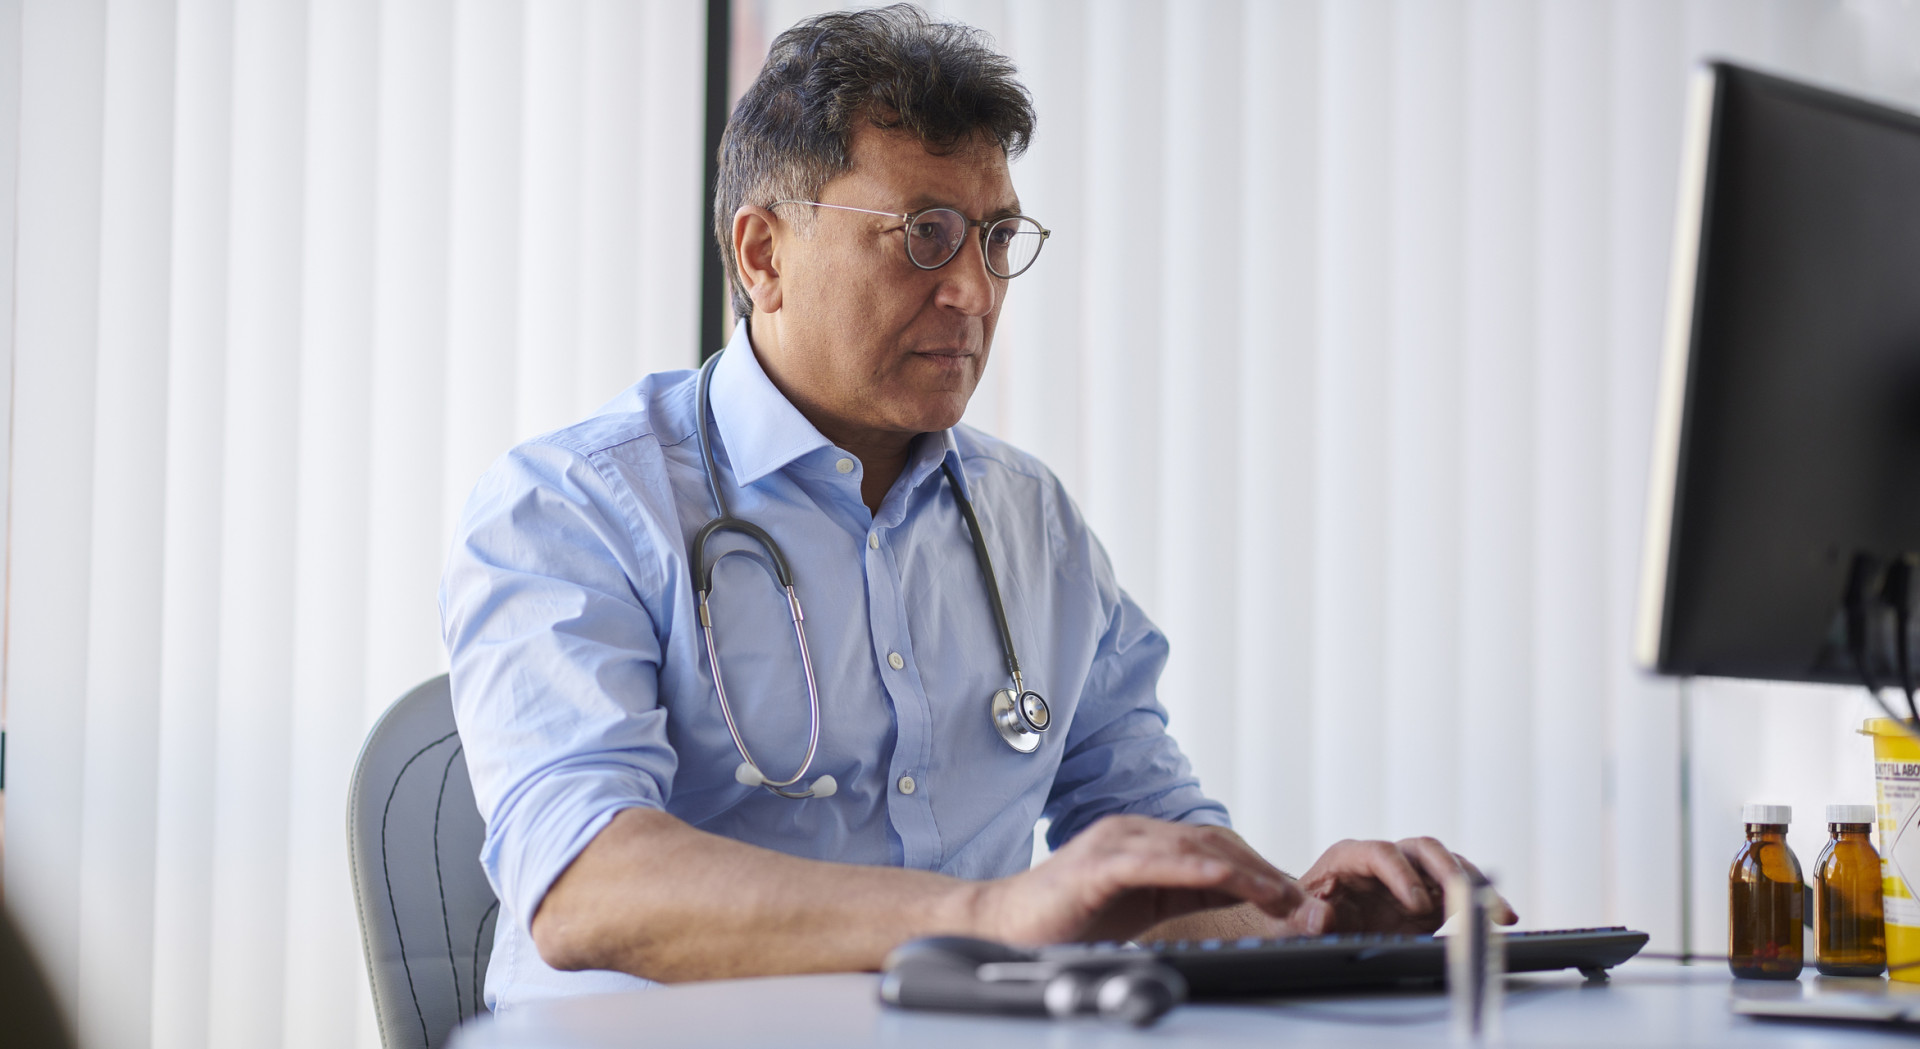 Doctor searching information on computer.